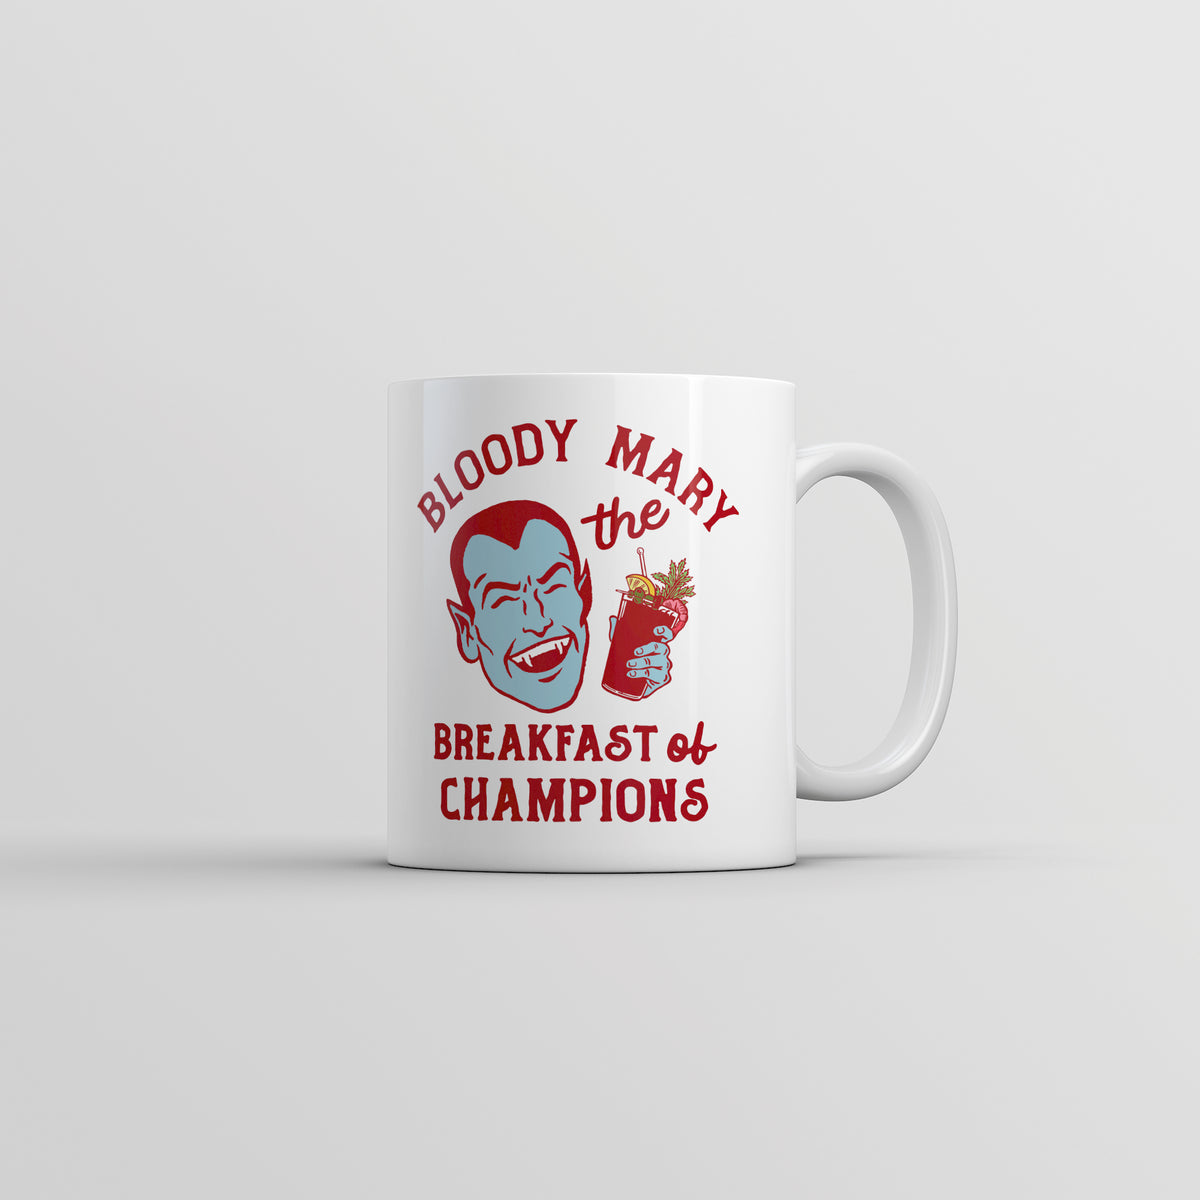 Funny White Bloody Mary The Breakfast Of Champions Coffee Mug Nerdy Halloween sarcastic Tee